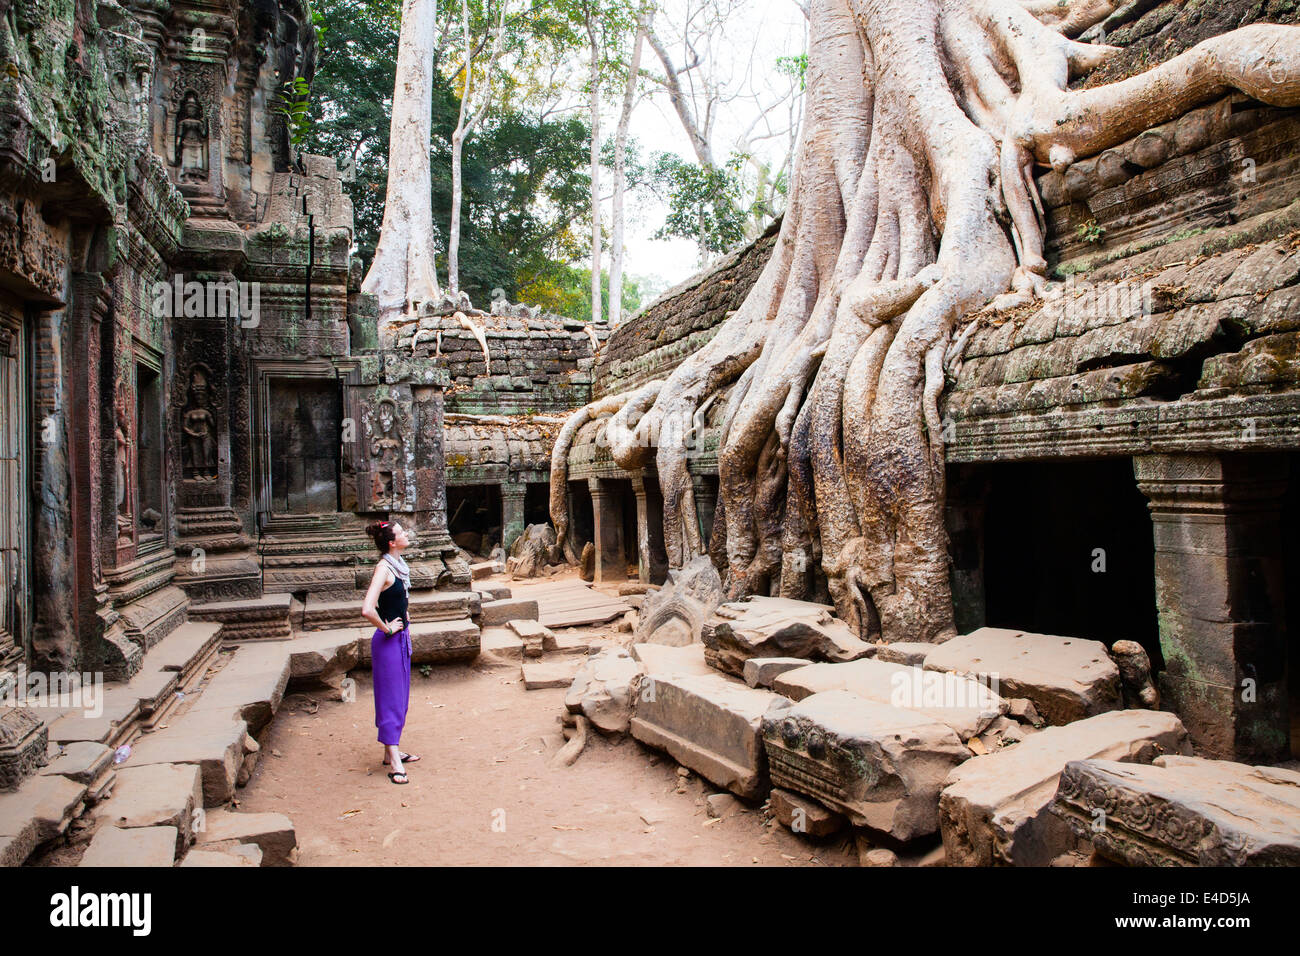 Woman holidaymaker looks at tree roots, Ta Phrom / Tha Phrom, Angkor temple complex, Angkor Wat, Siem Reap, Cambodia. Stock Photo